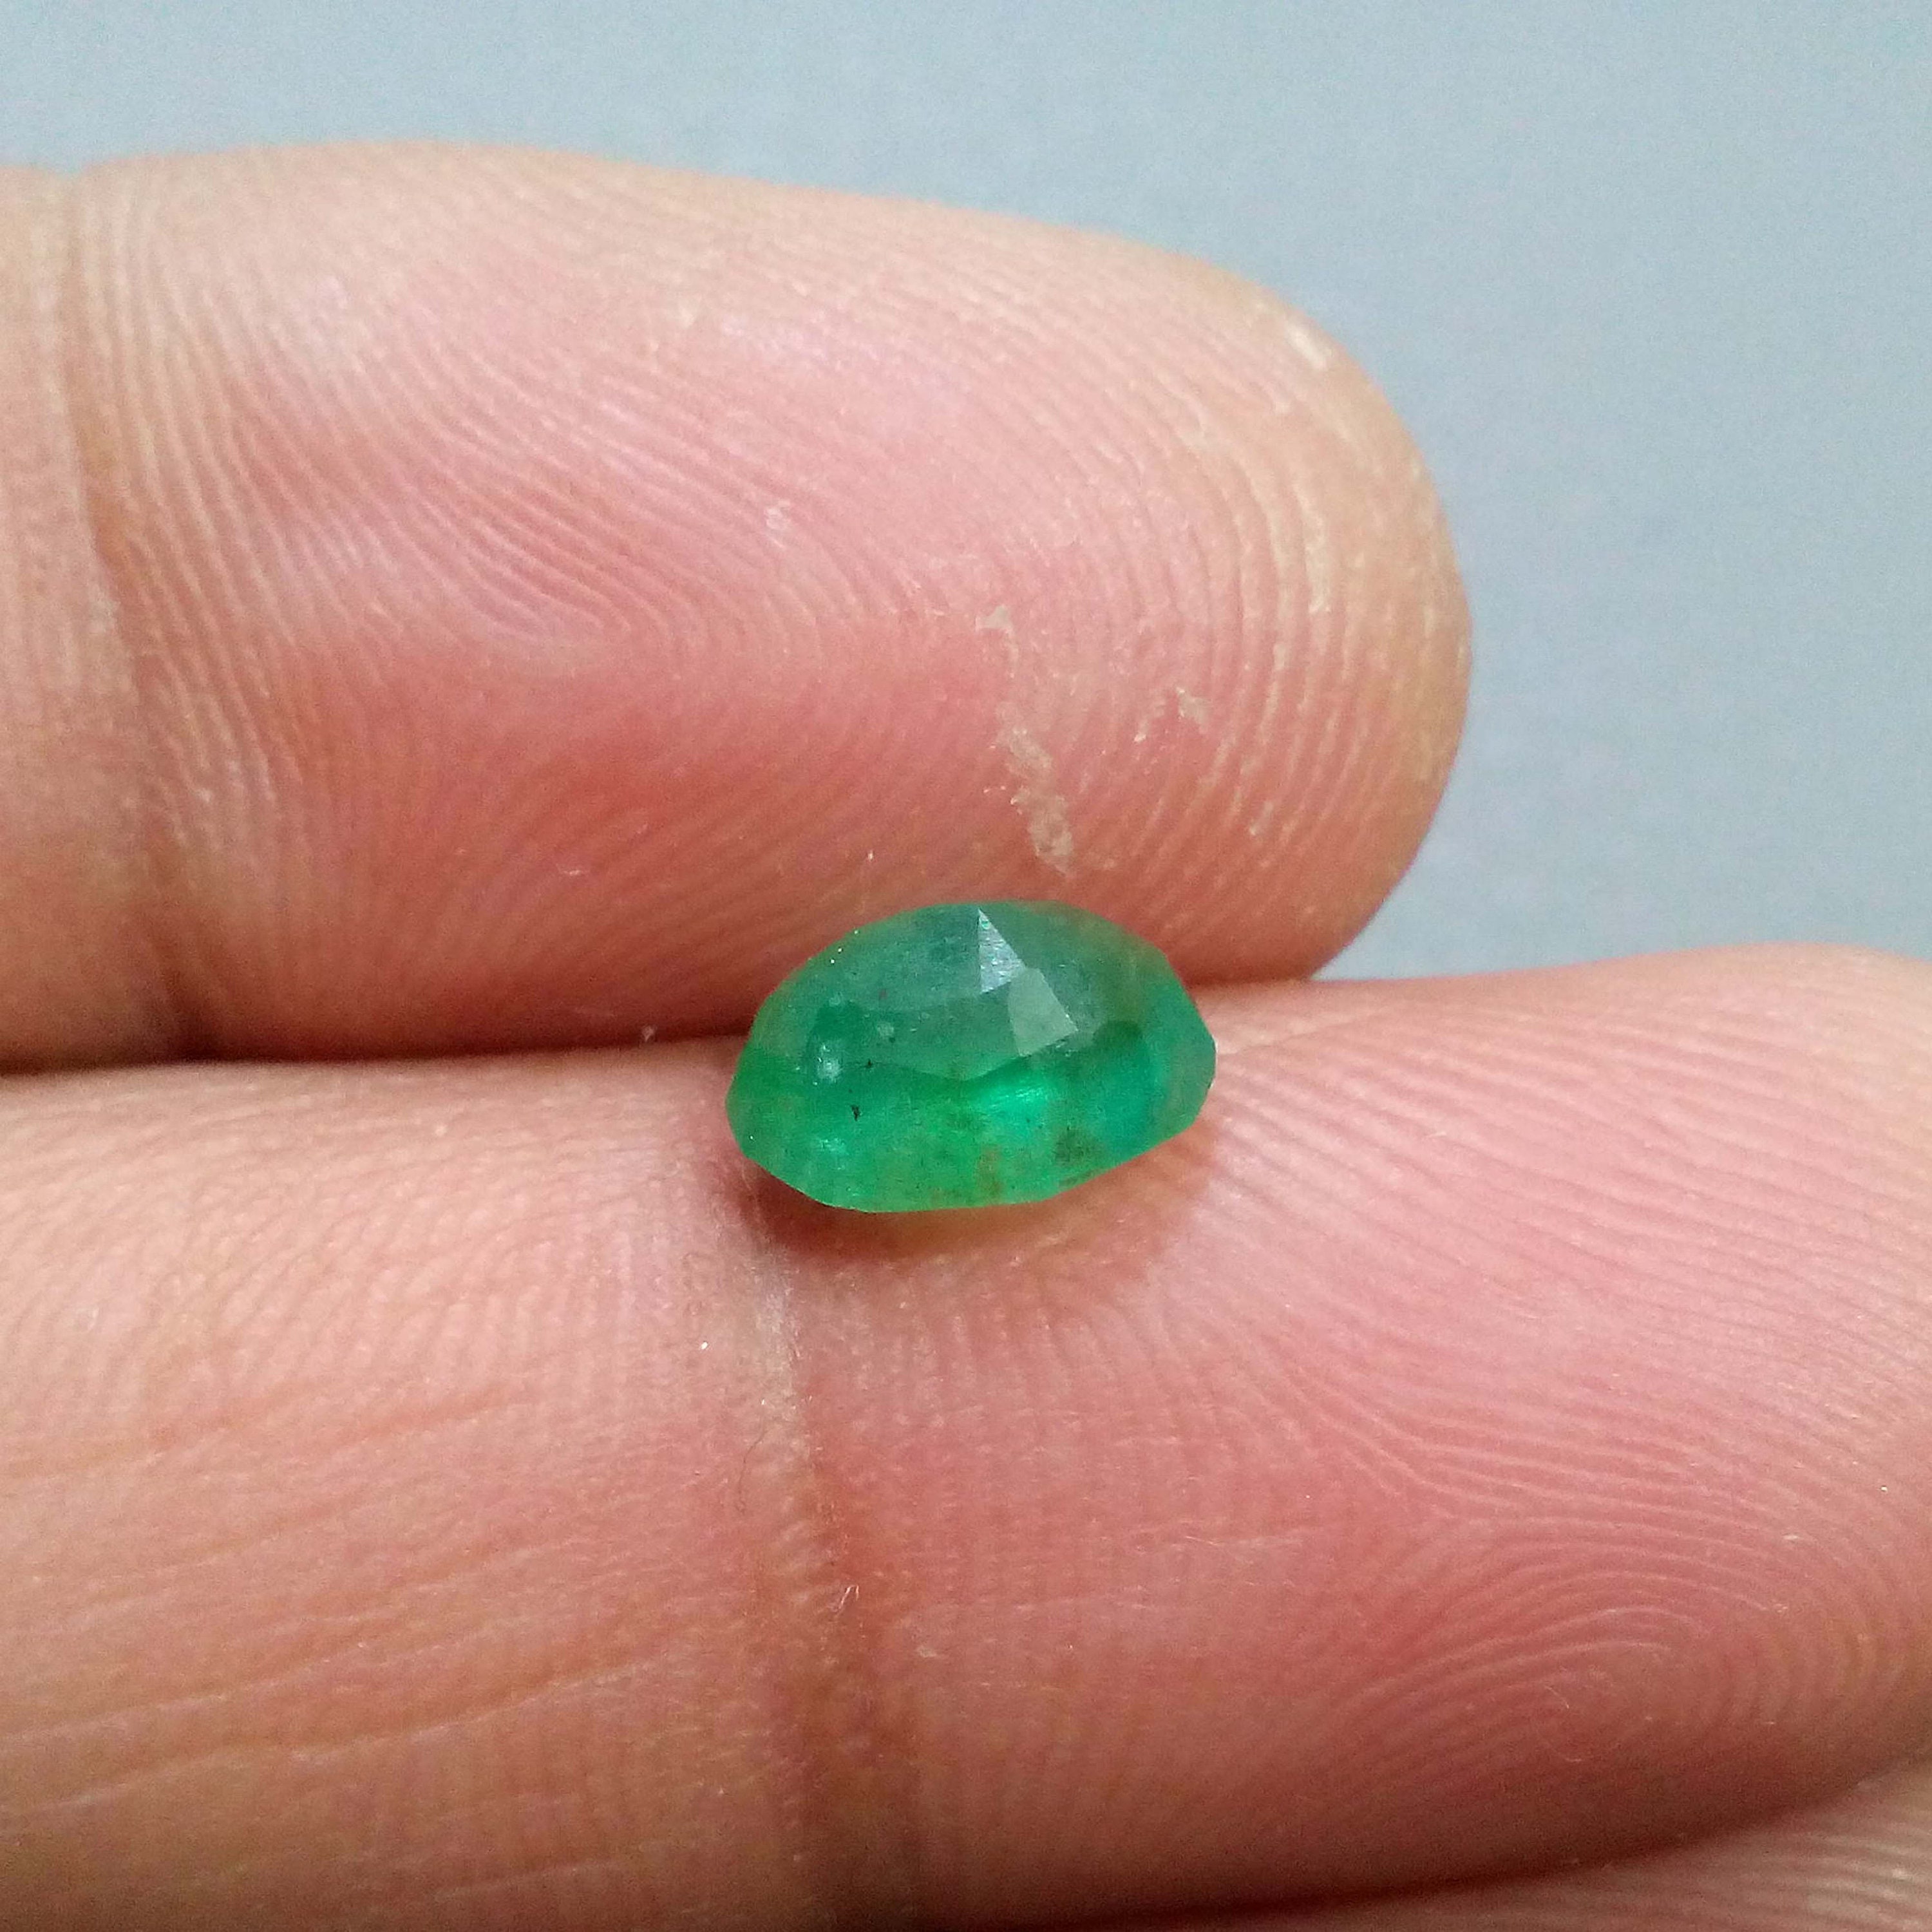 Fabulous Zambian Green Emerald 1.60 Crt 9x7x4 MM Faceted Oval Shape Loose Gemstone For Jewelry Making